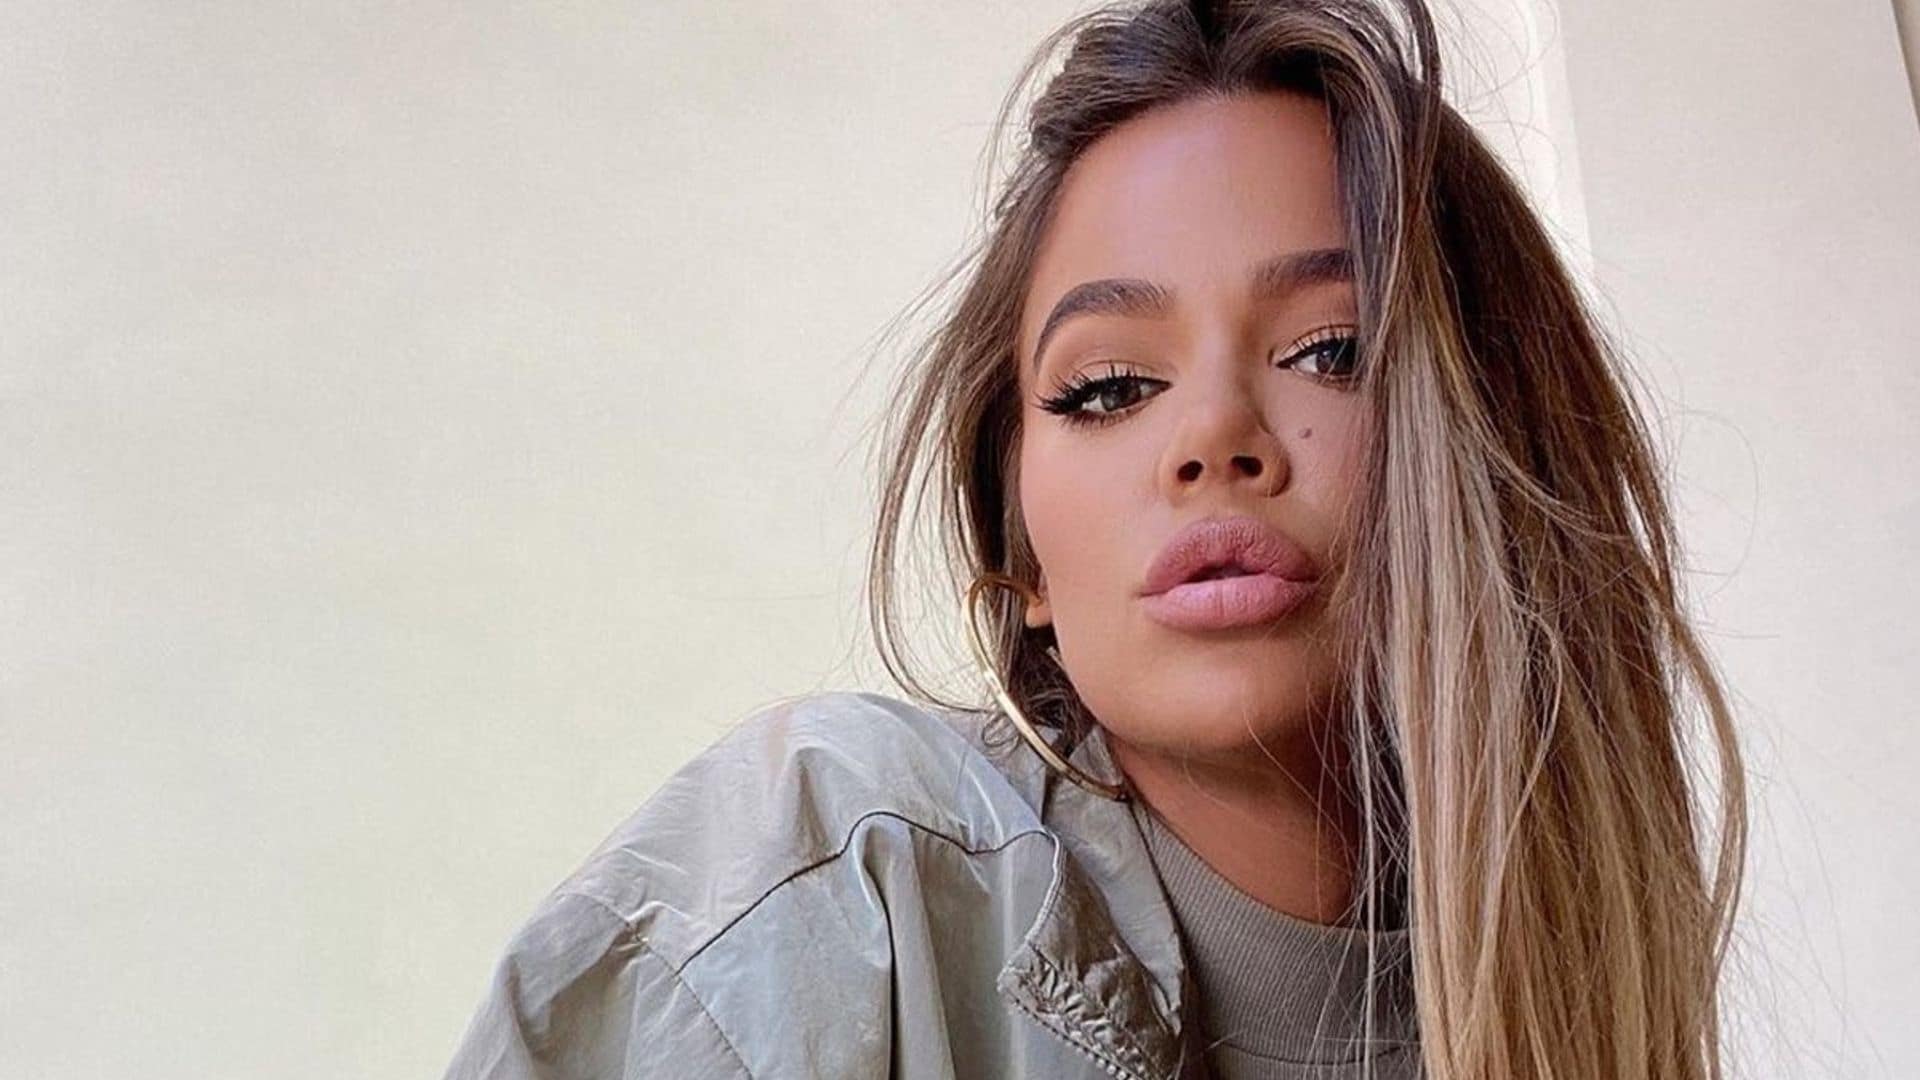 Khloe Kardashian got showered in sweet wishes from her family and friends for her 37th birthday